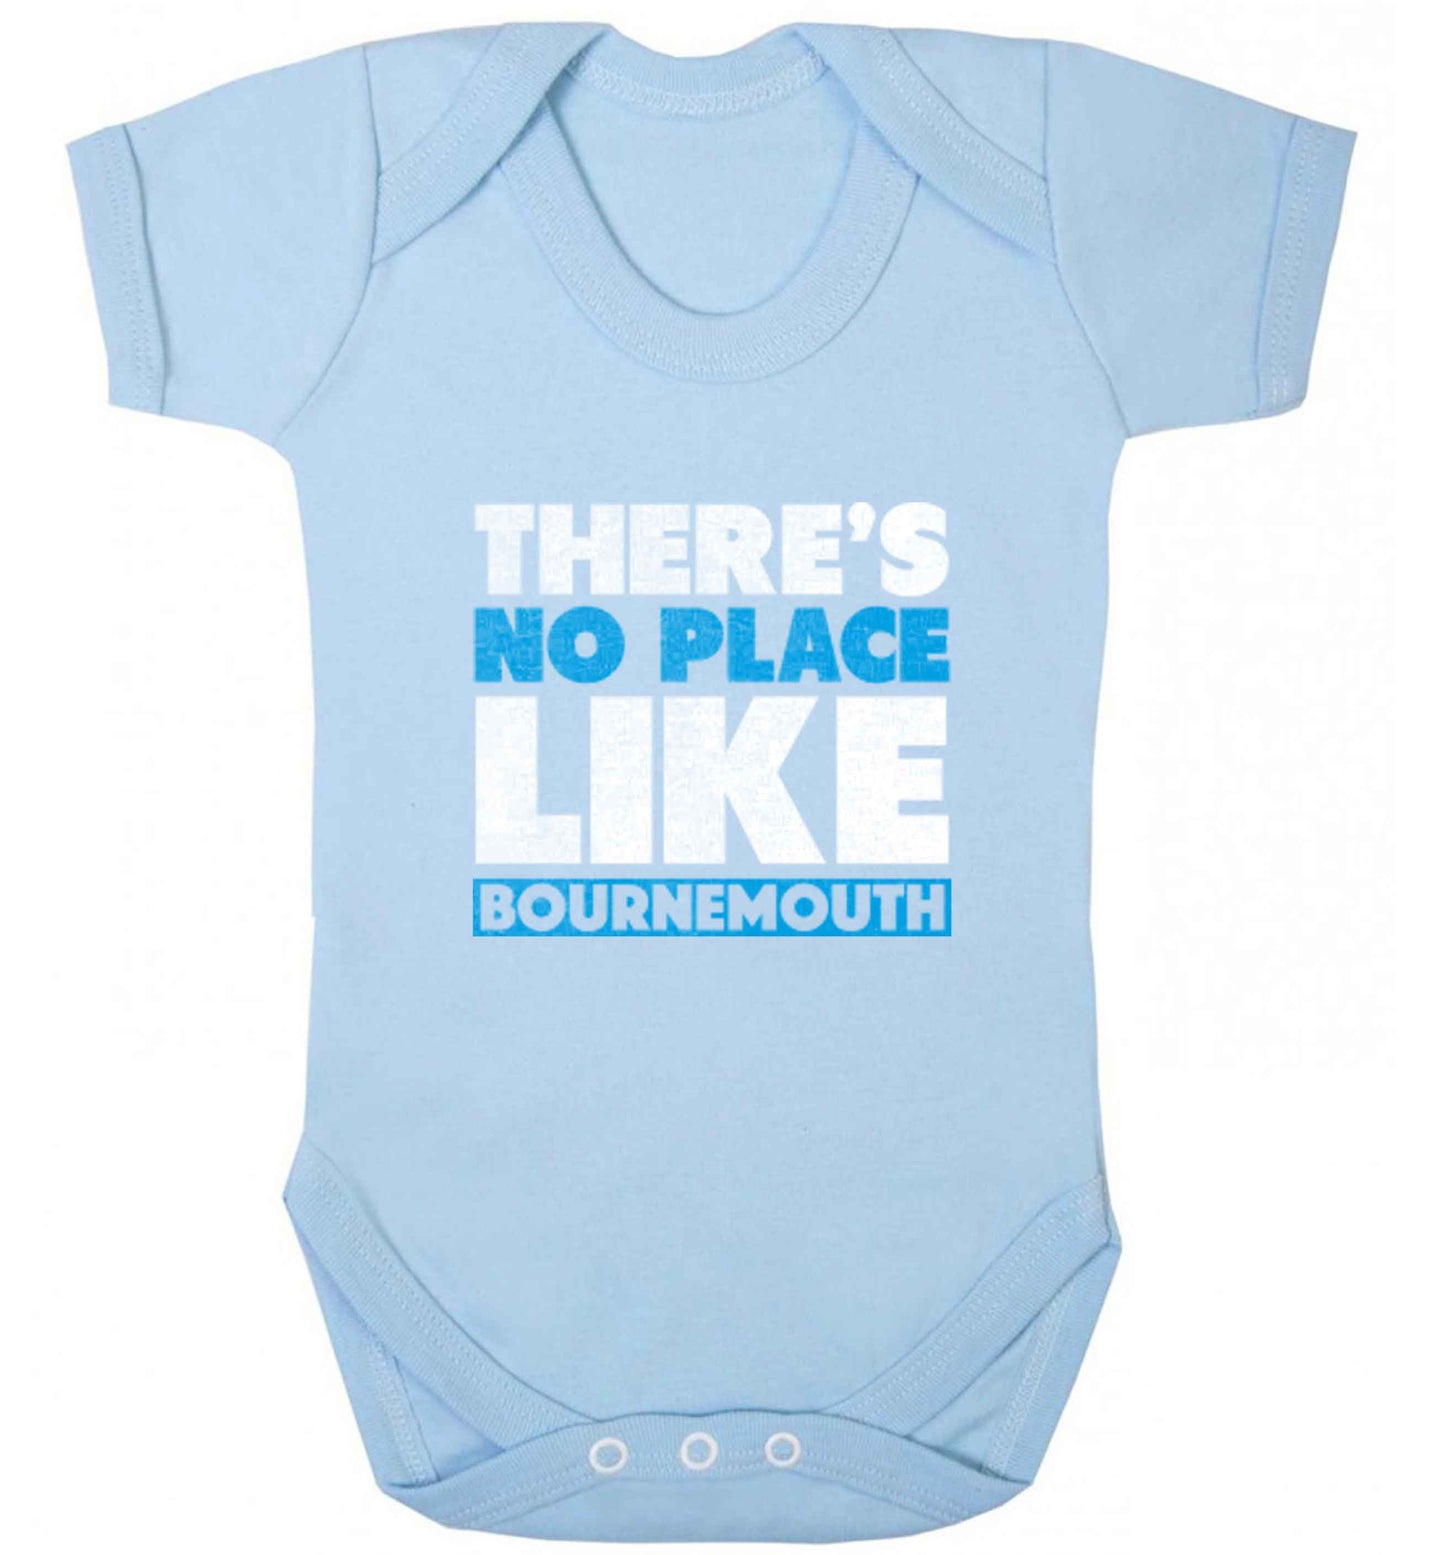 There's no place like Bournemouth baby vest pale blue 18-24 months